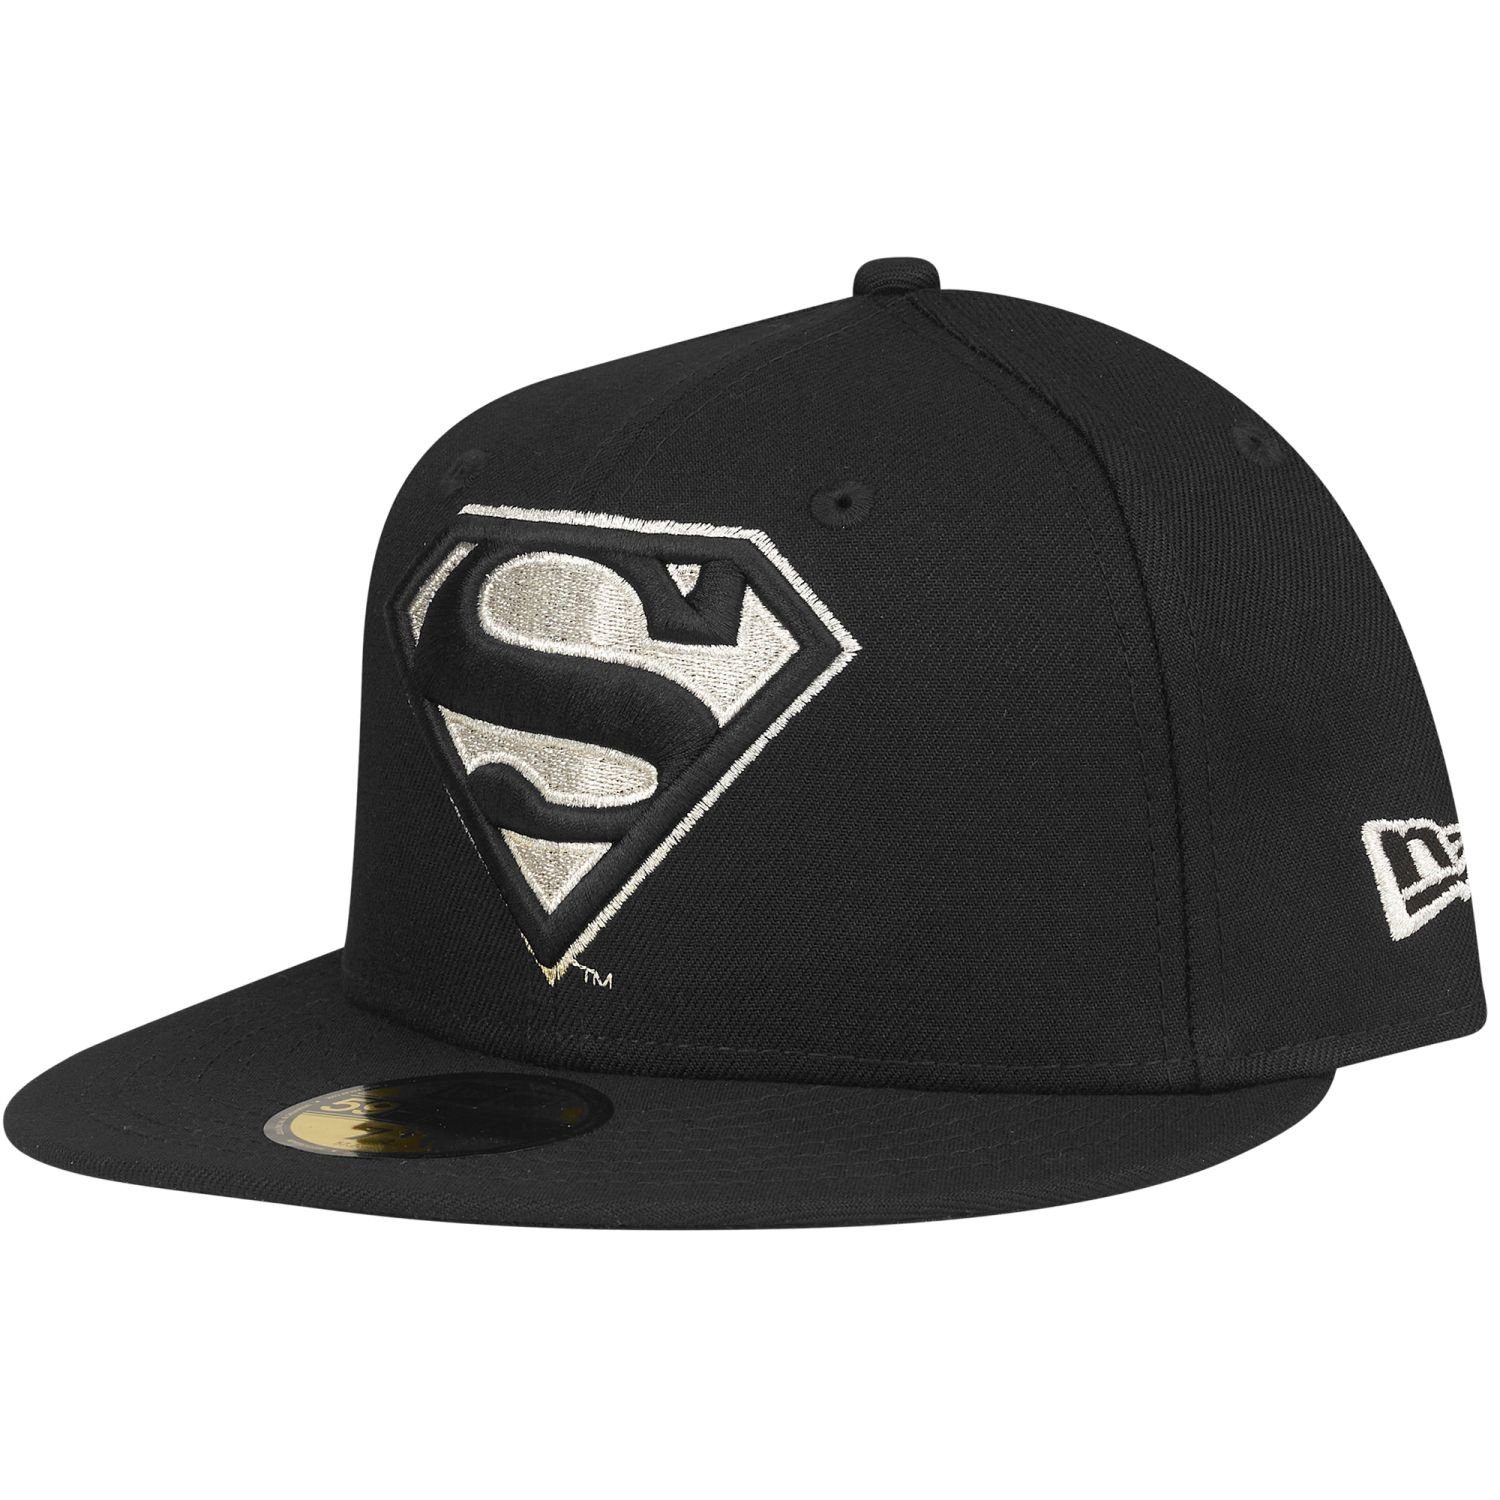 New Era Fitted Cap 59Fifty SUPERMAN silber